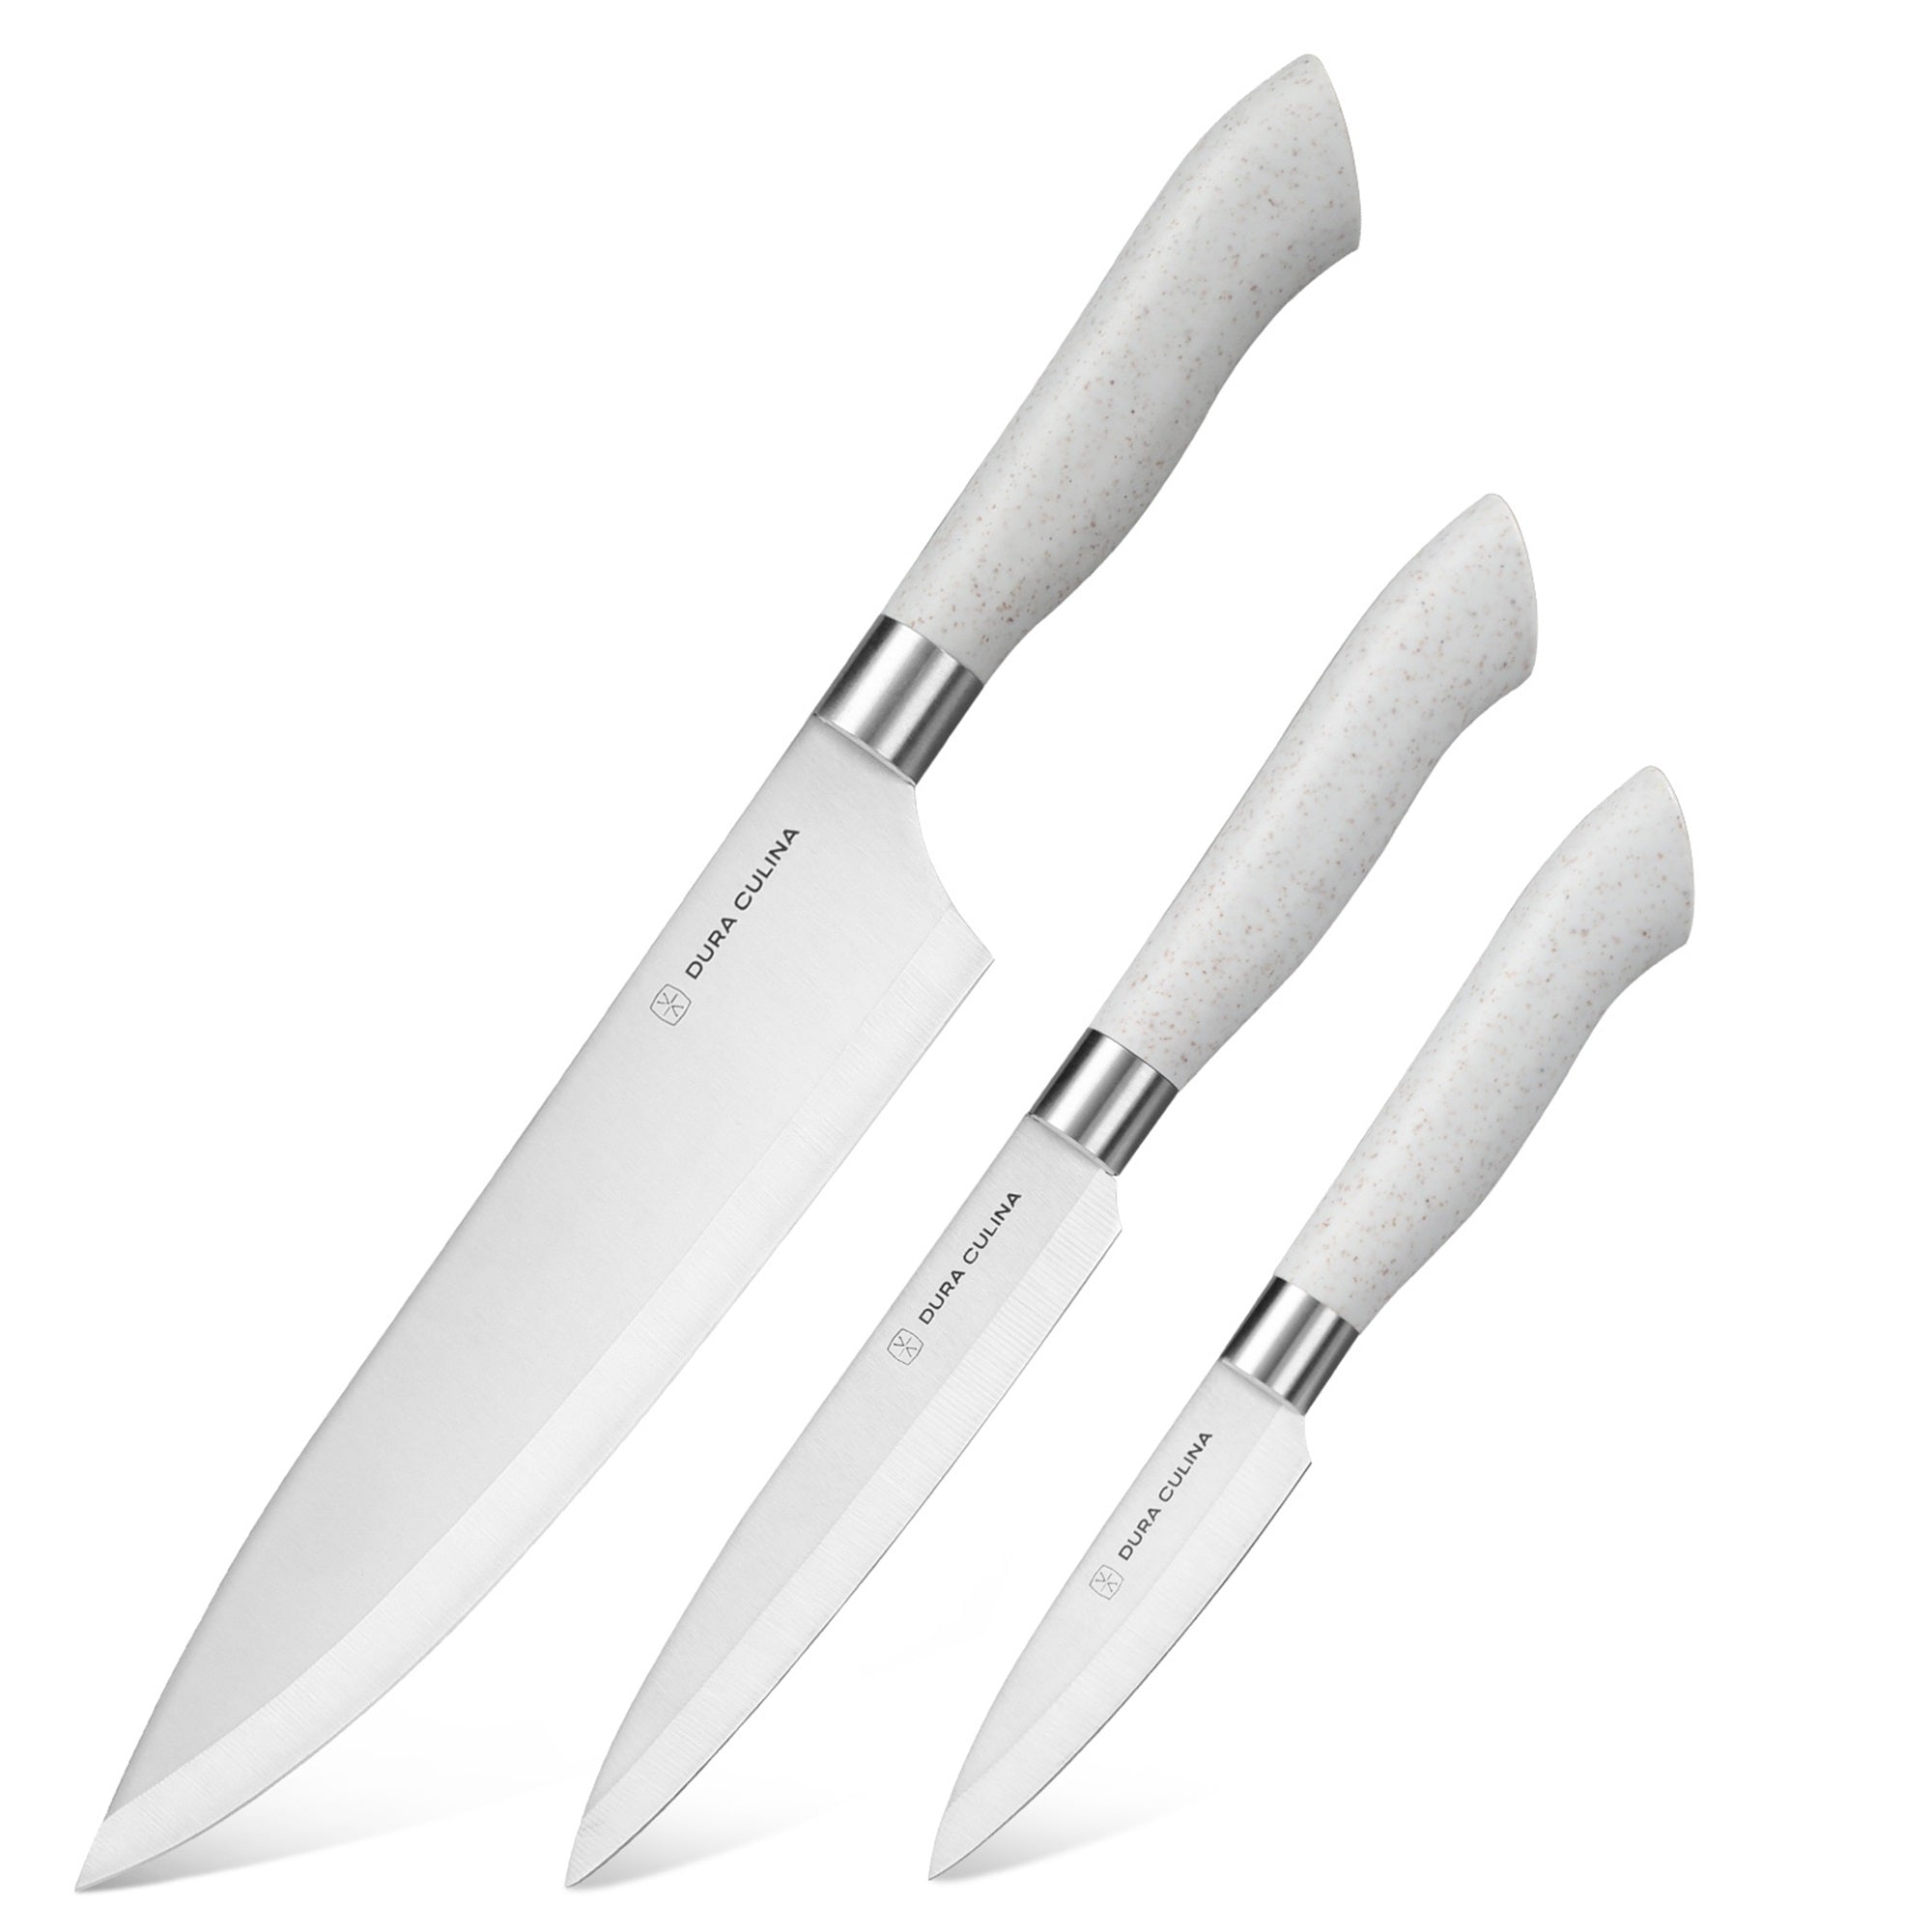 EcoCut 3 Piece Kitchen Knife Set With Blade Guards, Grey